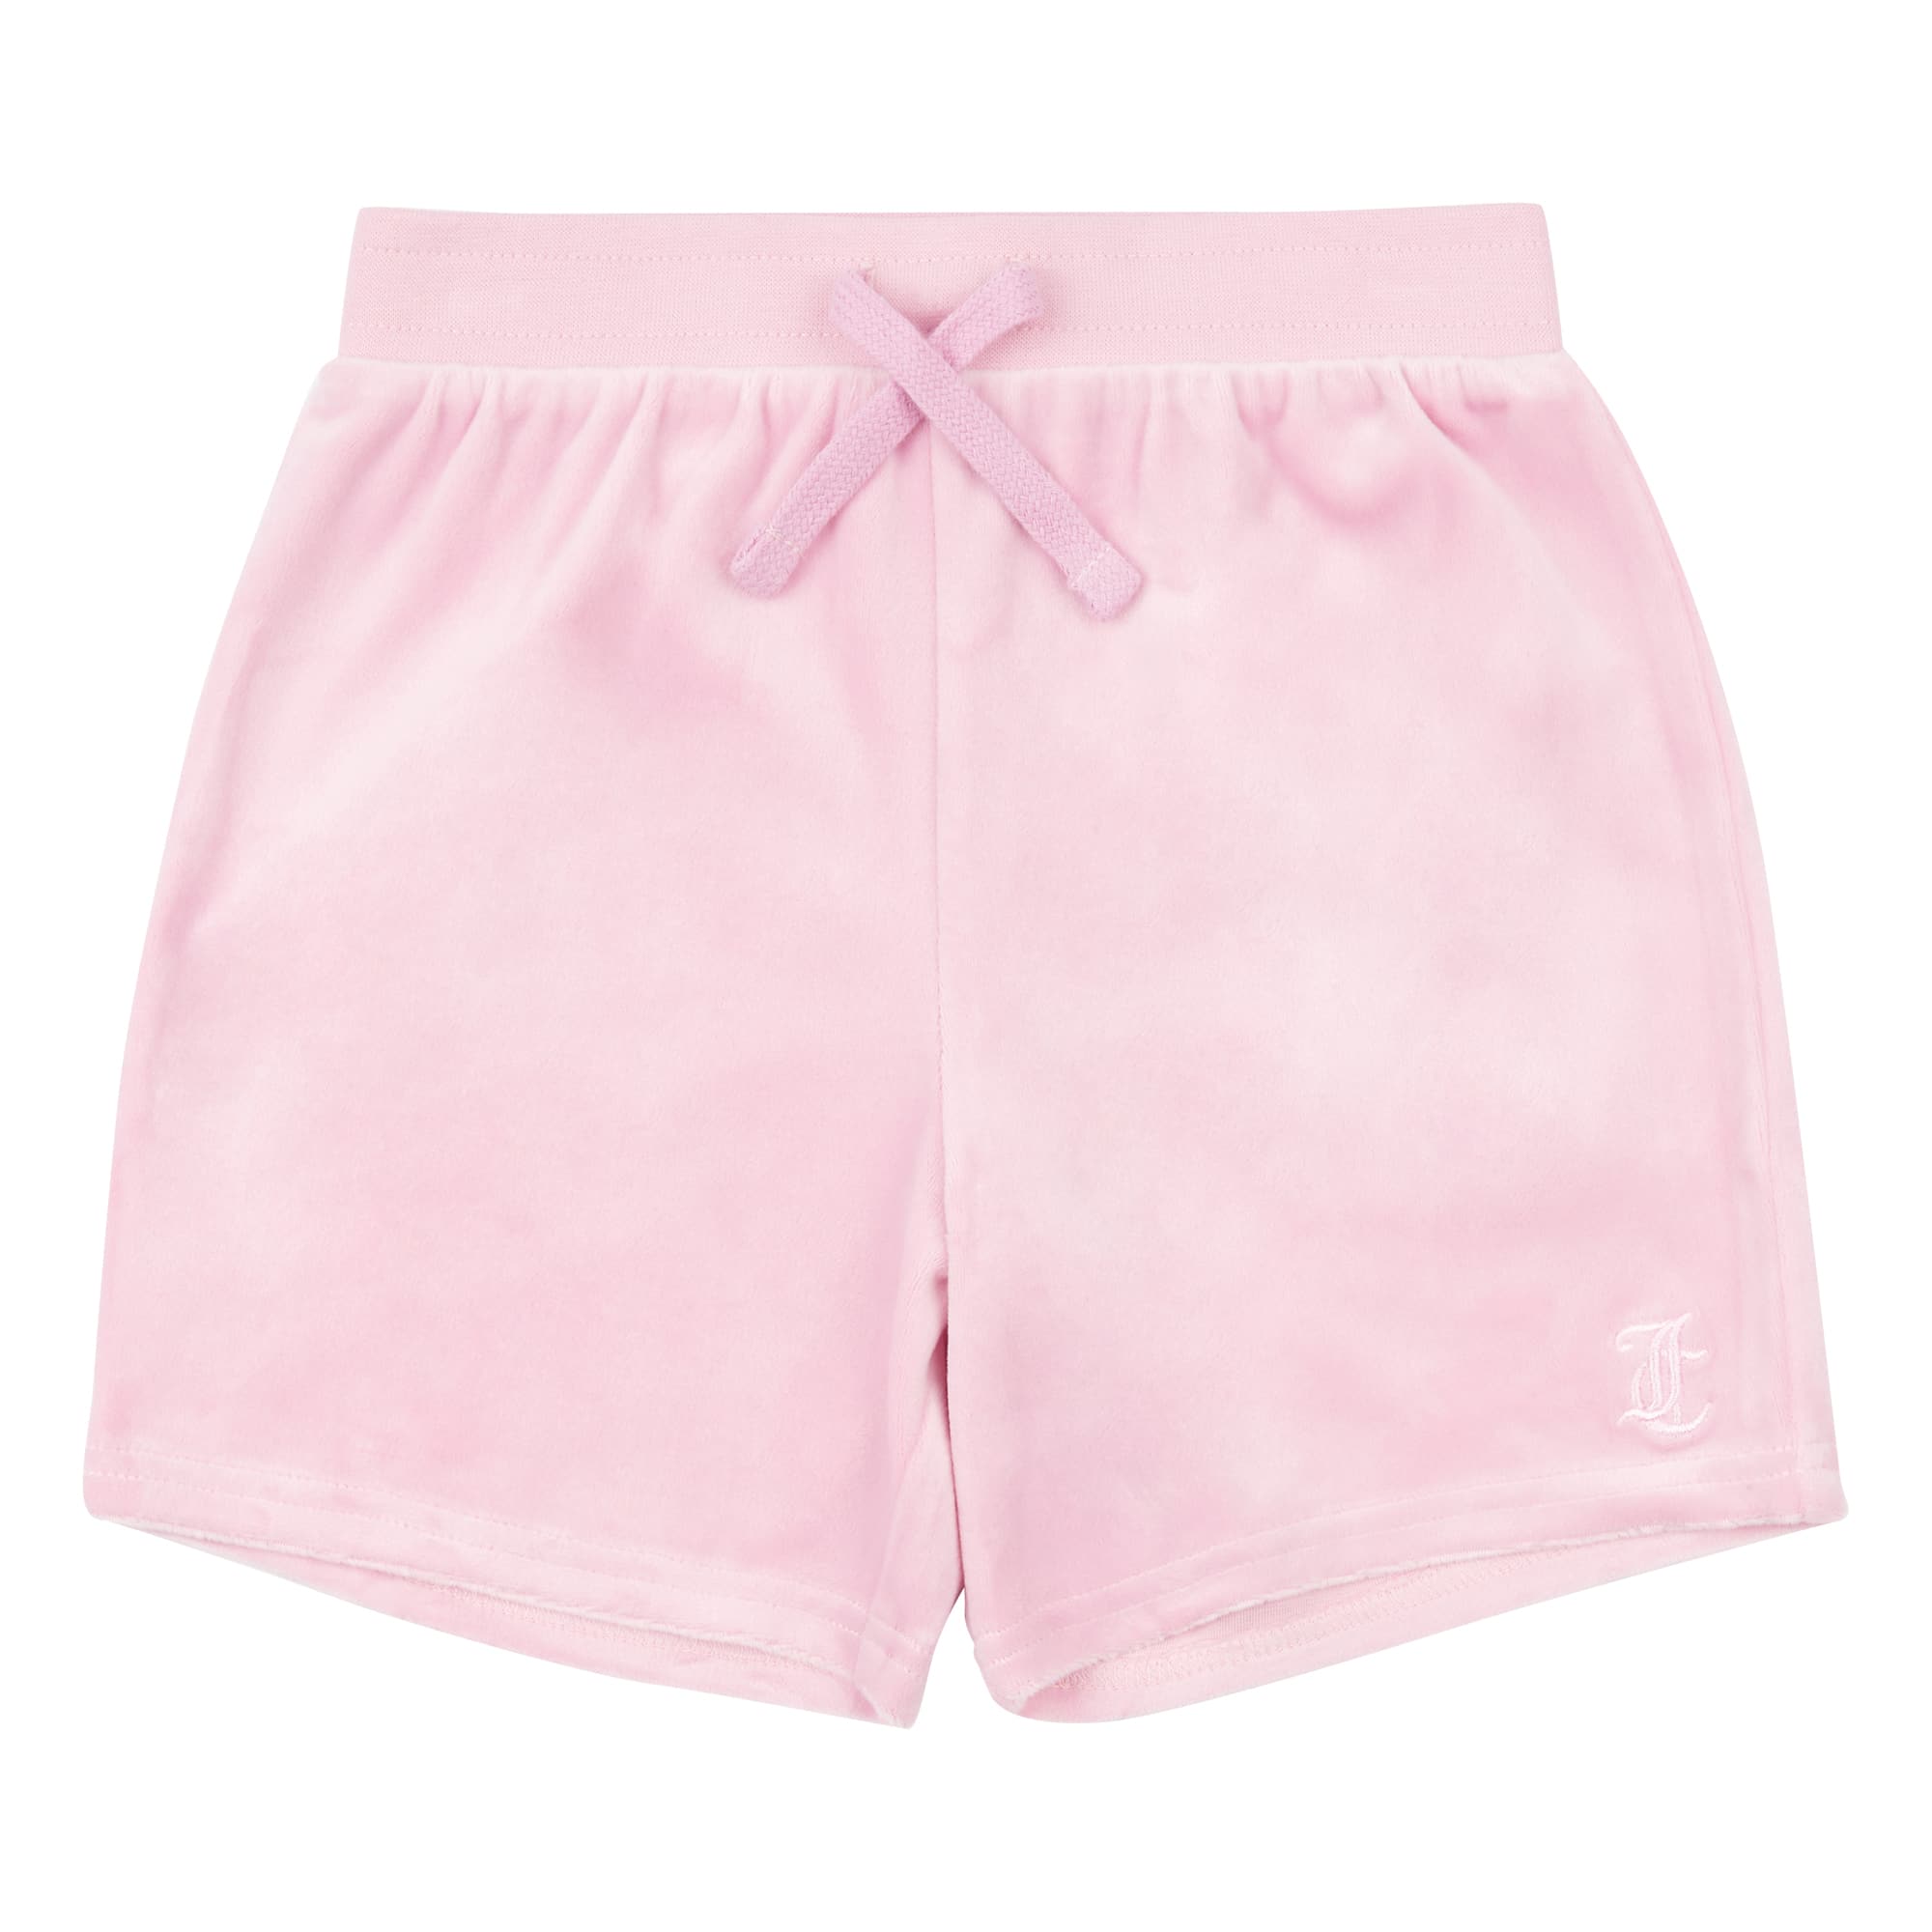 Juicy Couture girls pink shorts